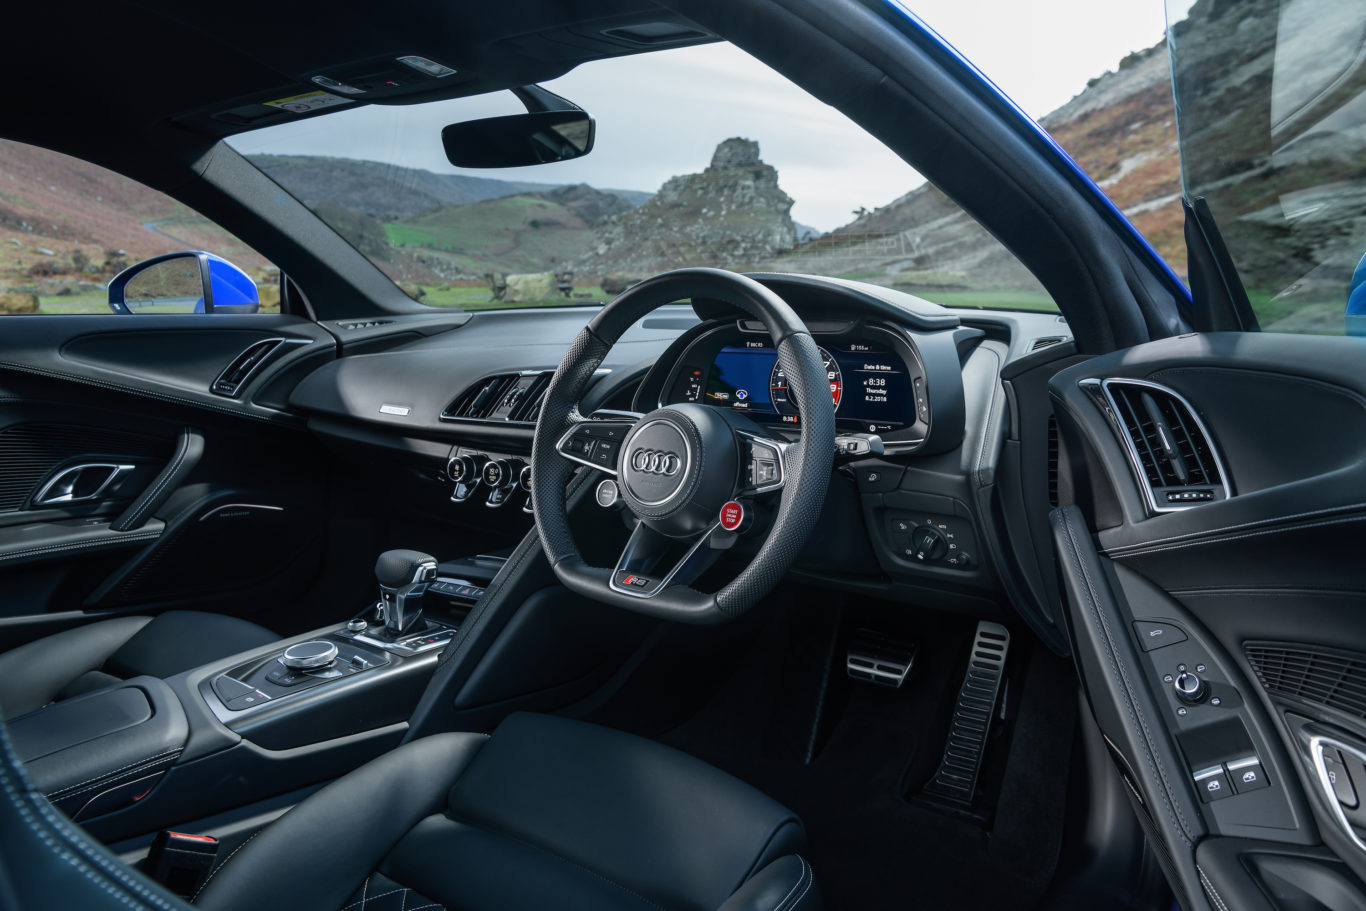 The interior of the Audi is supremely well made